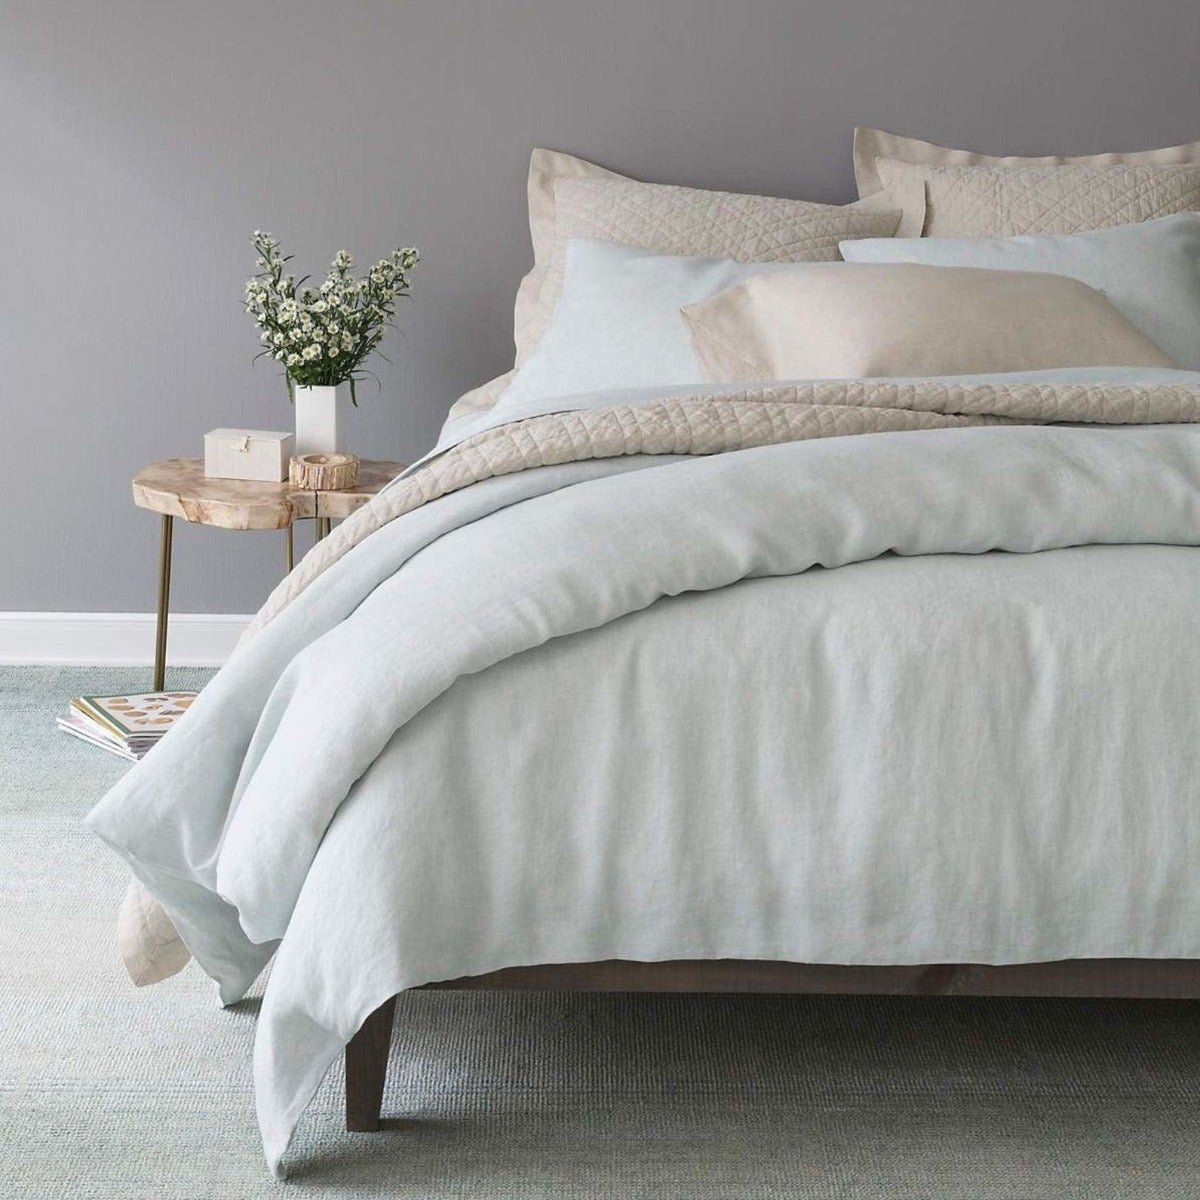 Lush linen bedding in the colour sky with neutral sheets. Styled view.